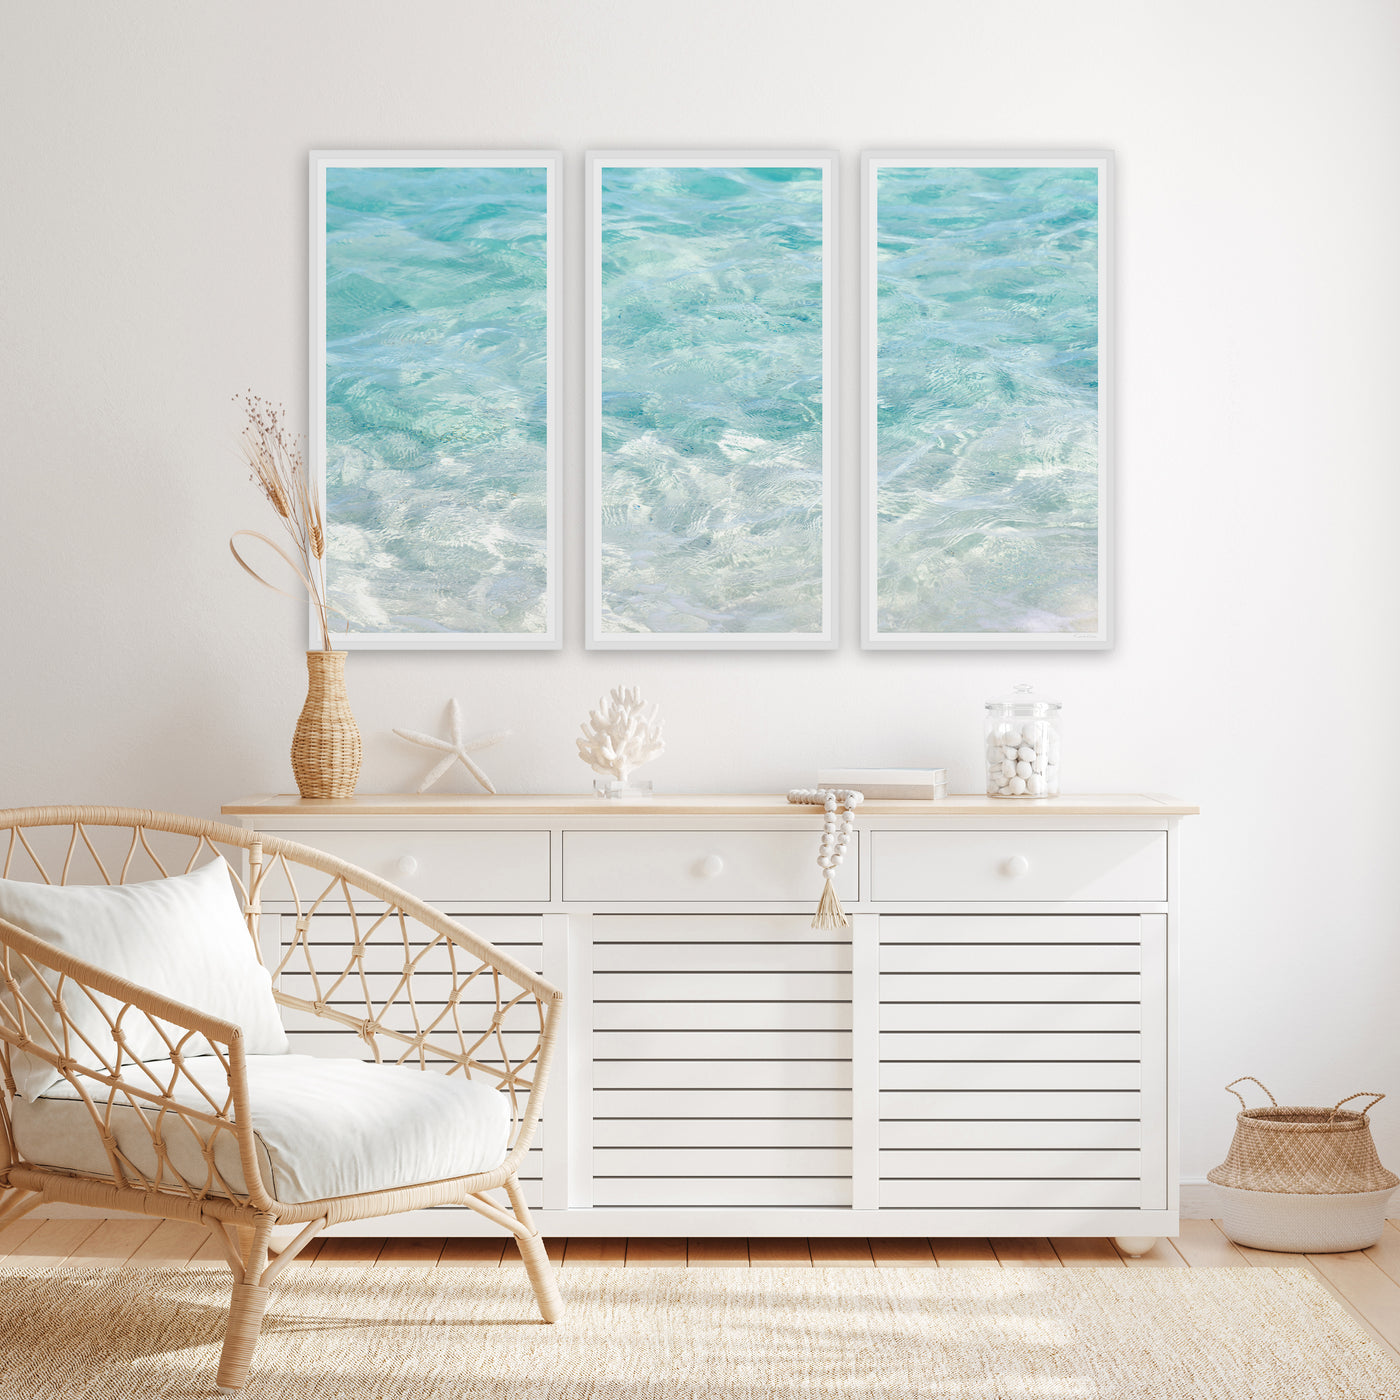 Turquoise Water - Triptych print by Cattie Coyle Photography in beach house